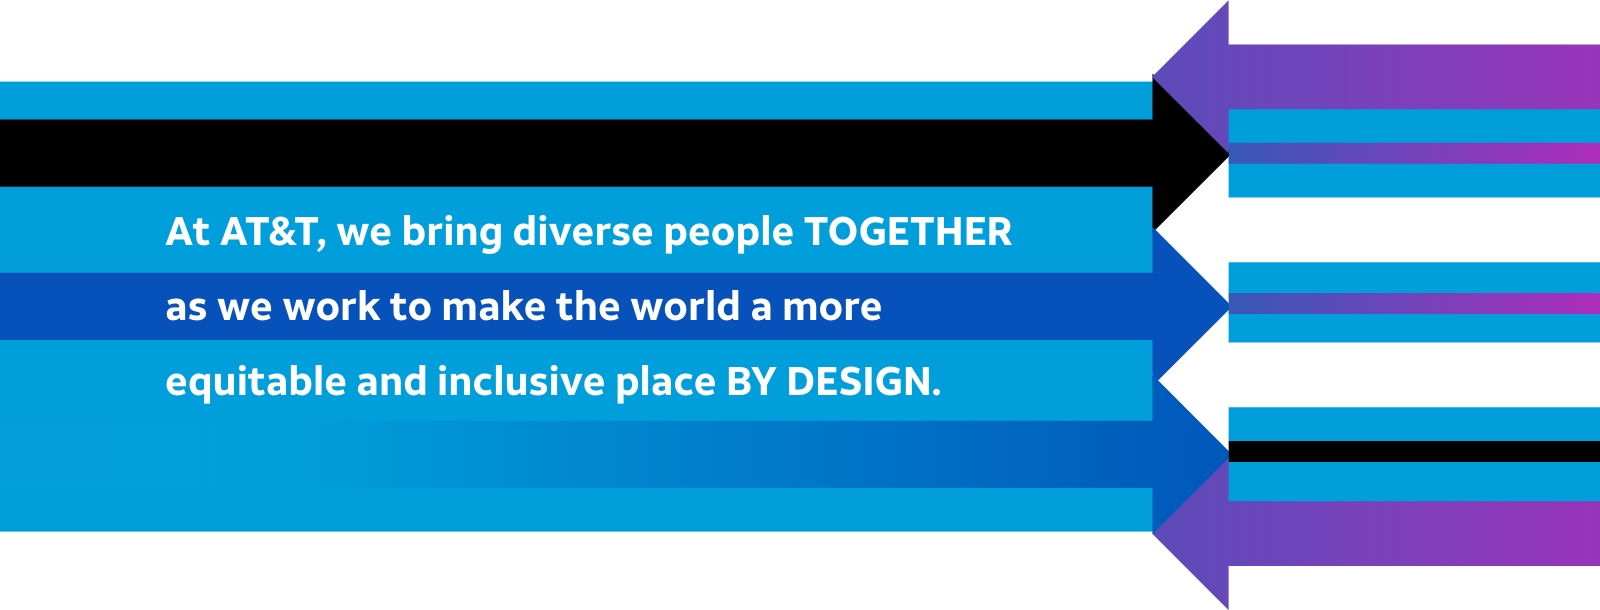 At AT&T, we bring diverse people together as we work to make the world a more equitable and inclusive place by design.